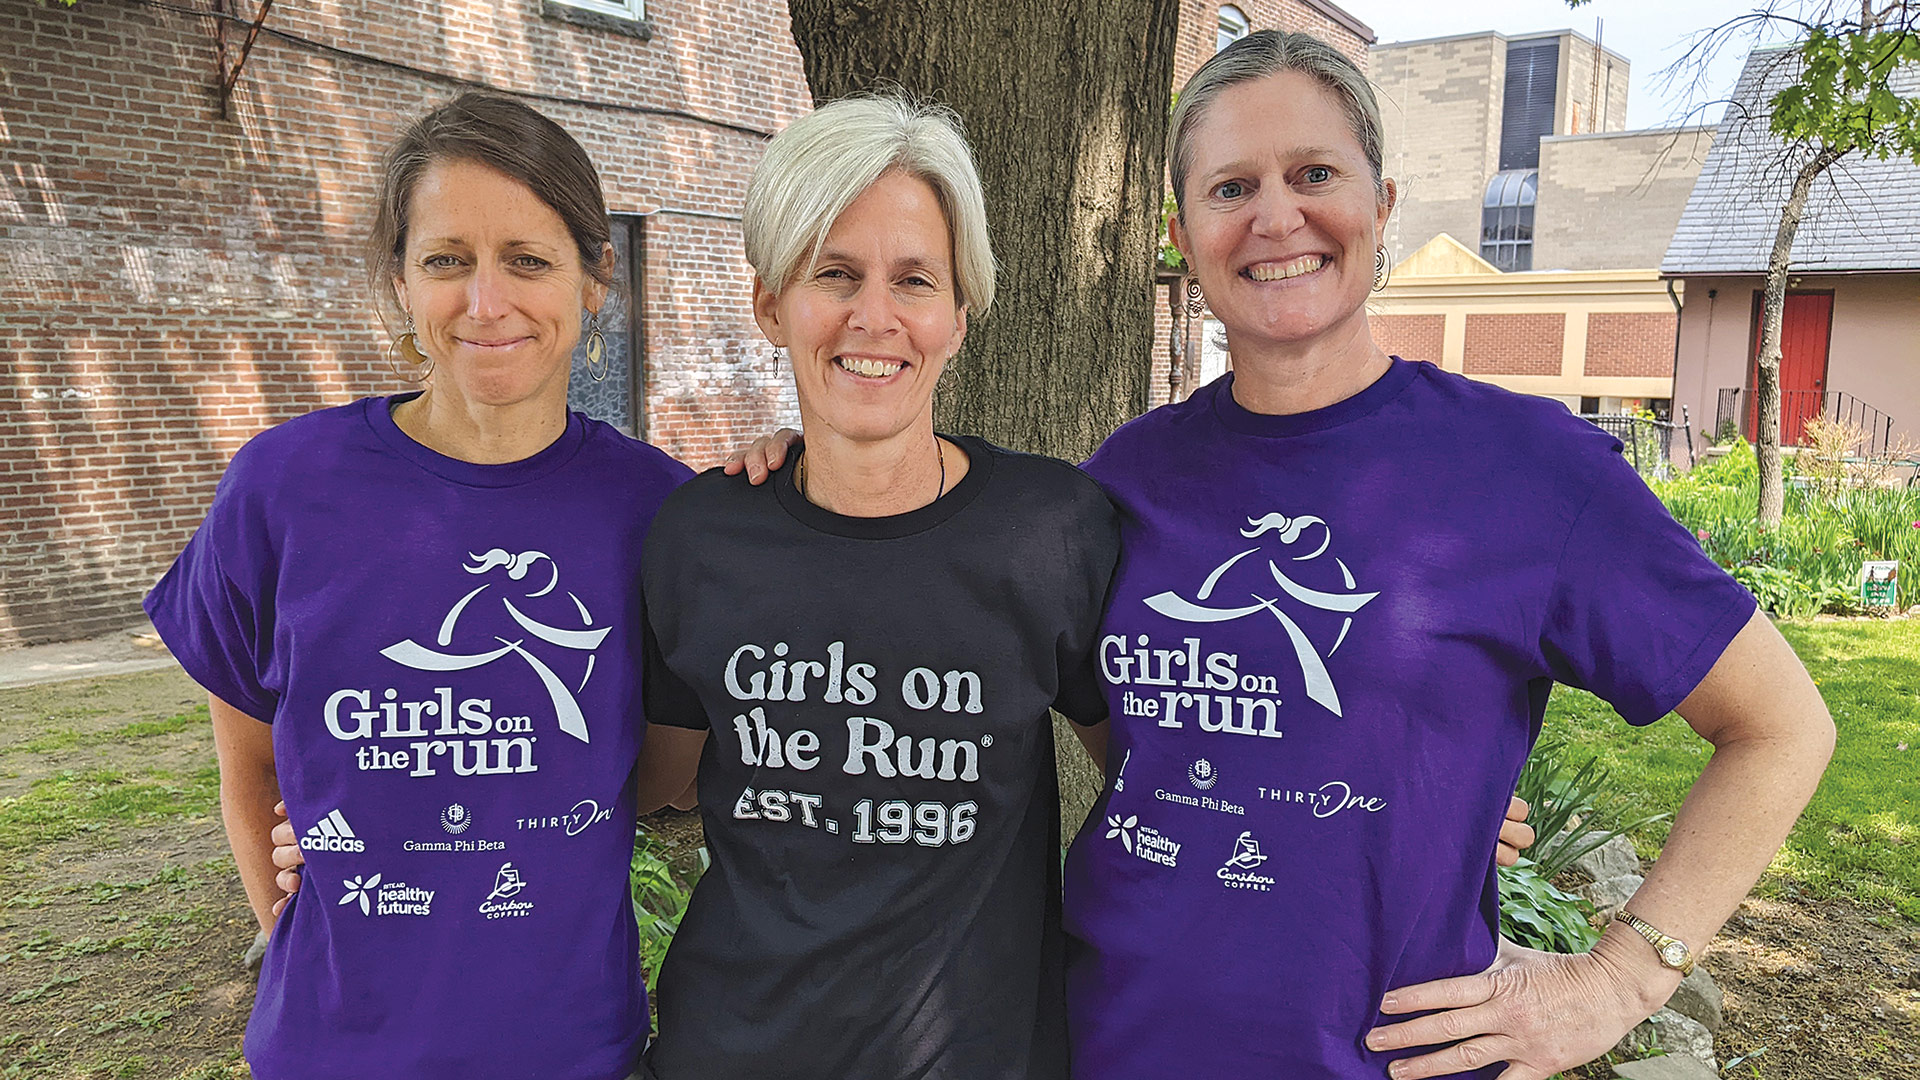 From left, Molly Hoyt, Alison Berman, and Coleen Ryan